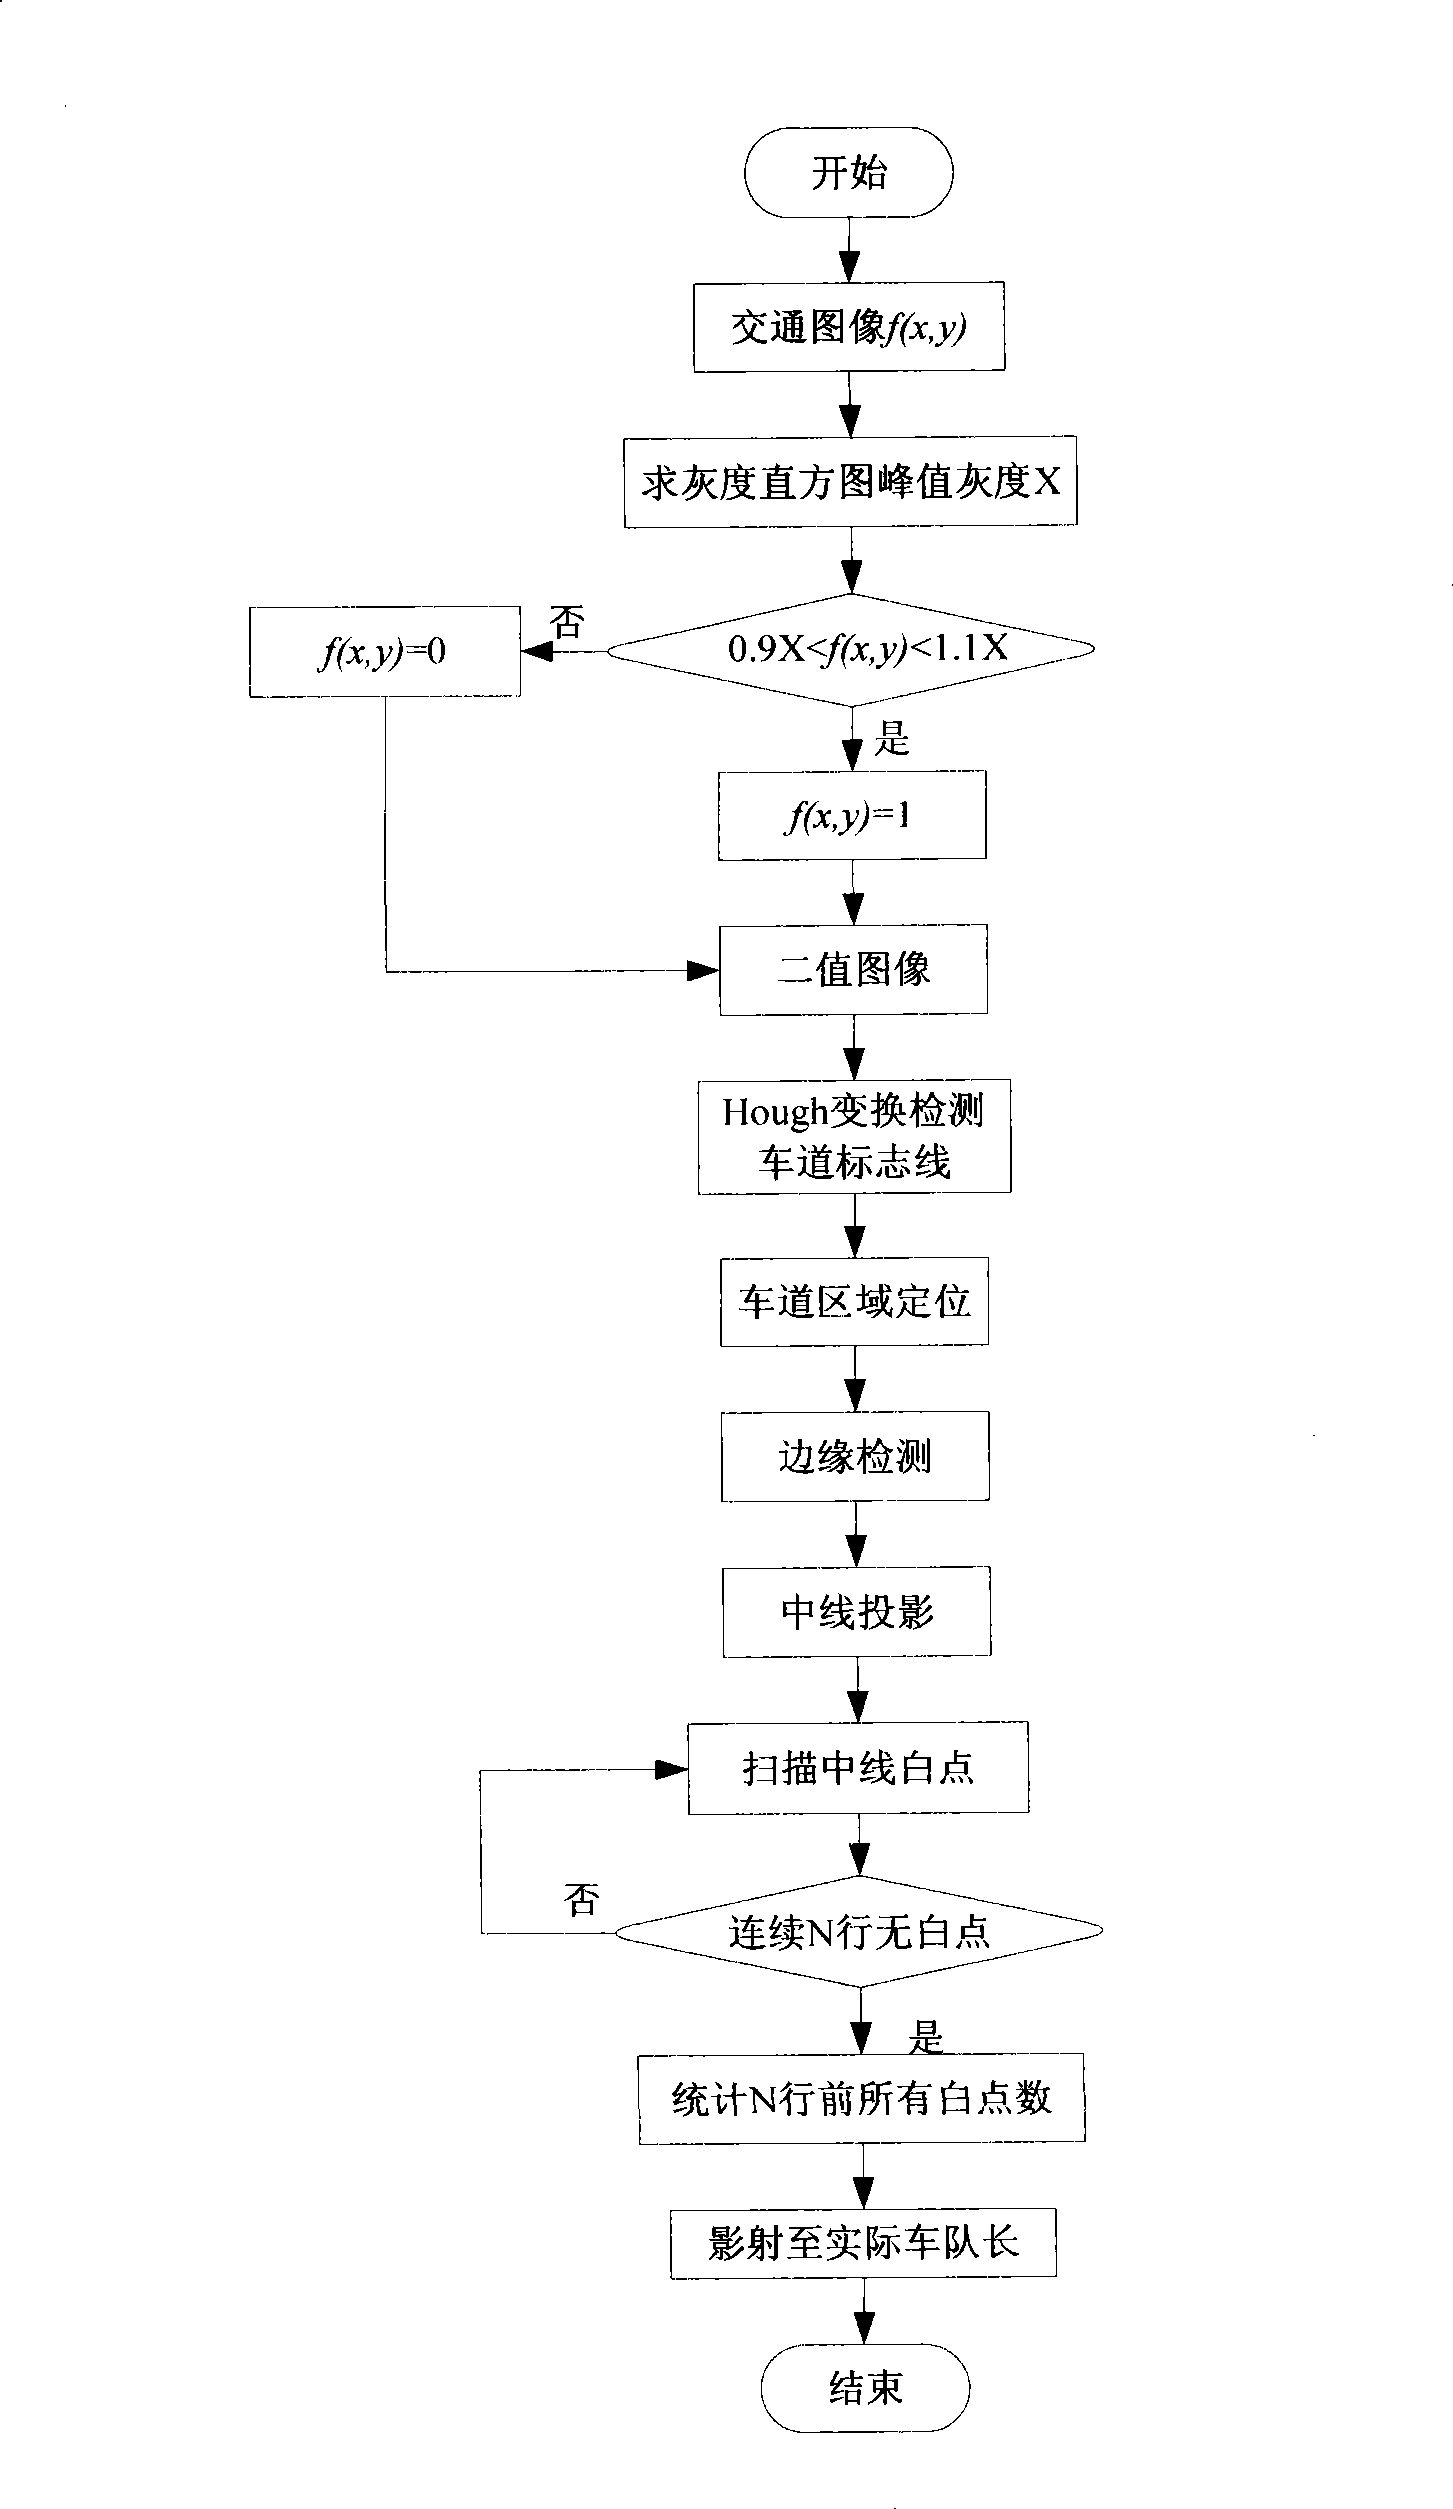 Single-frame image detection apparatus for vehicle queue length at road junction and its working method